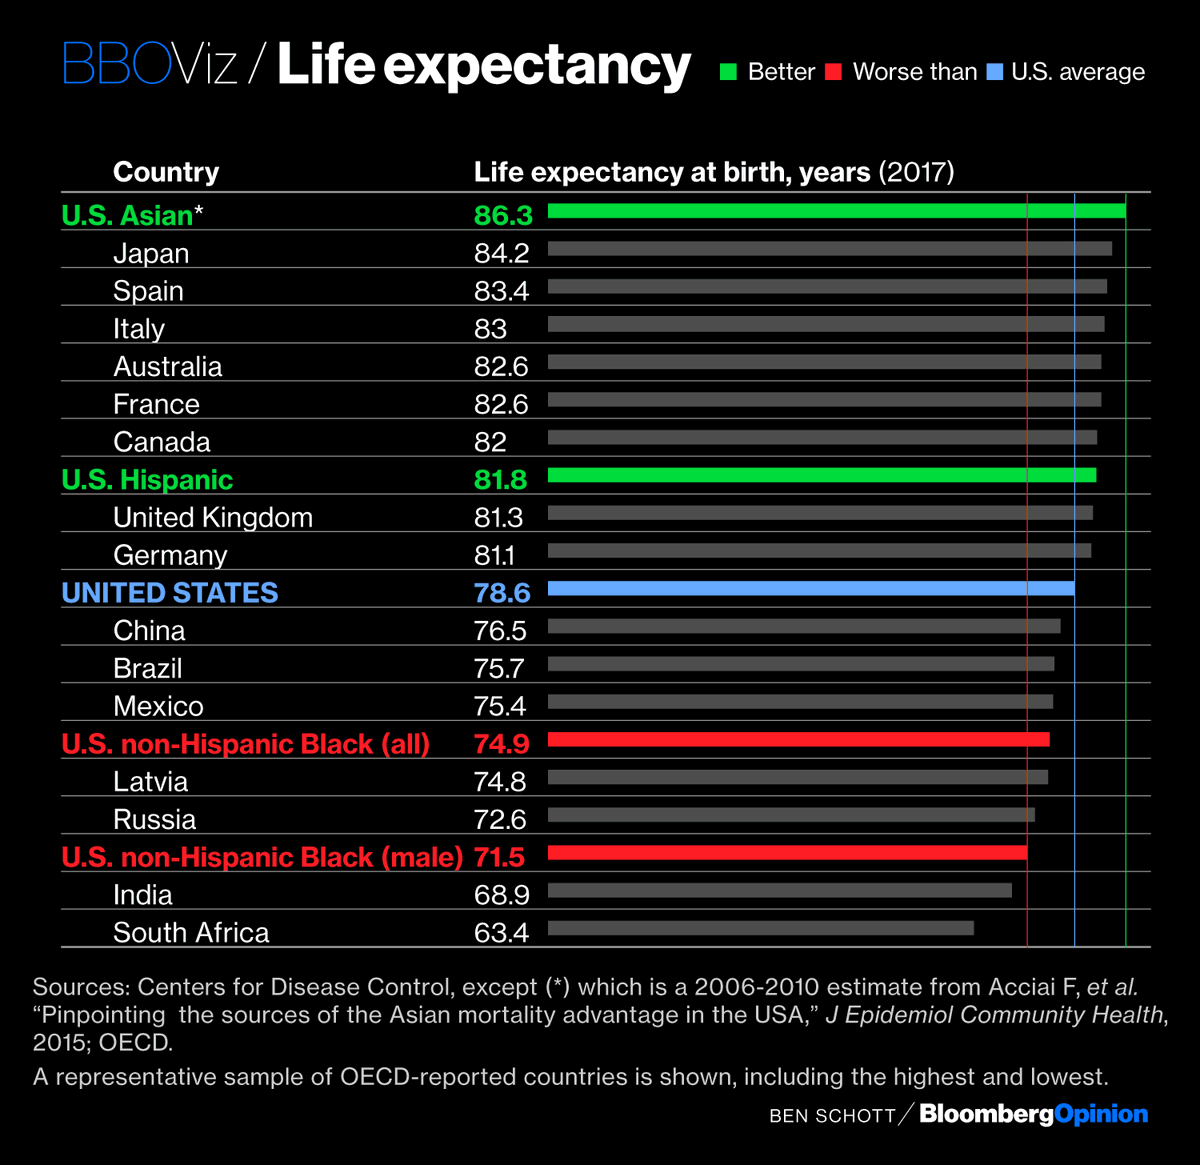 The inequalities continue to the grave.While U.S. Hispanic people live longer on average than Brits or Germans, American Black men have a lower life expectancy than the average Latvian or Russian person  http://trib.al/XAWPzJn 